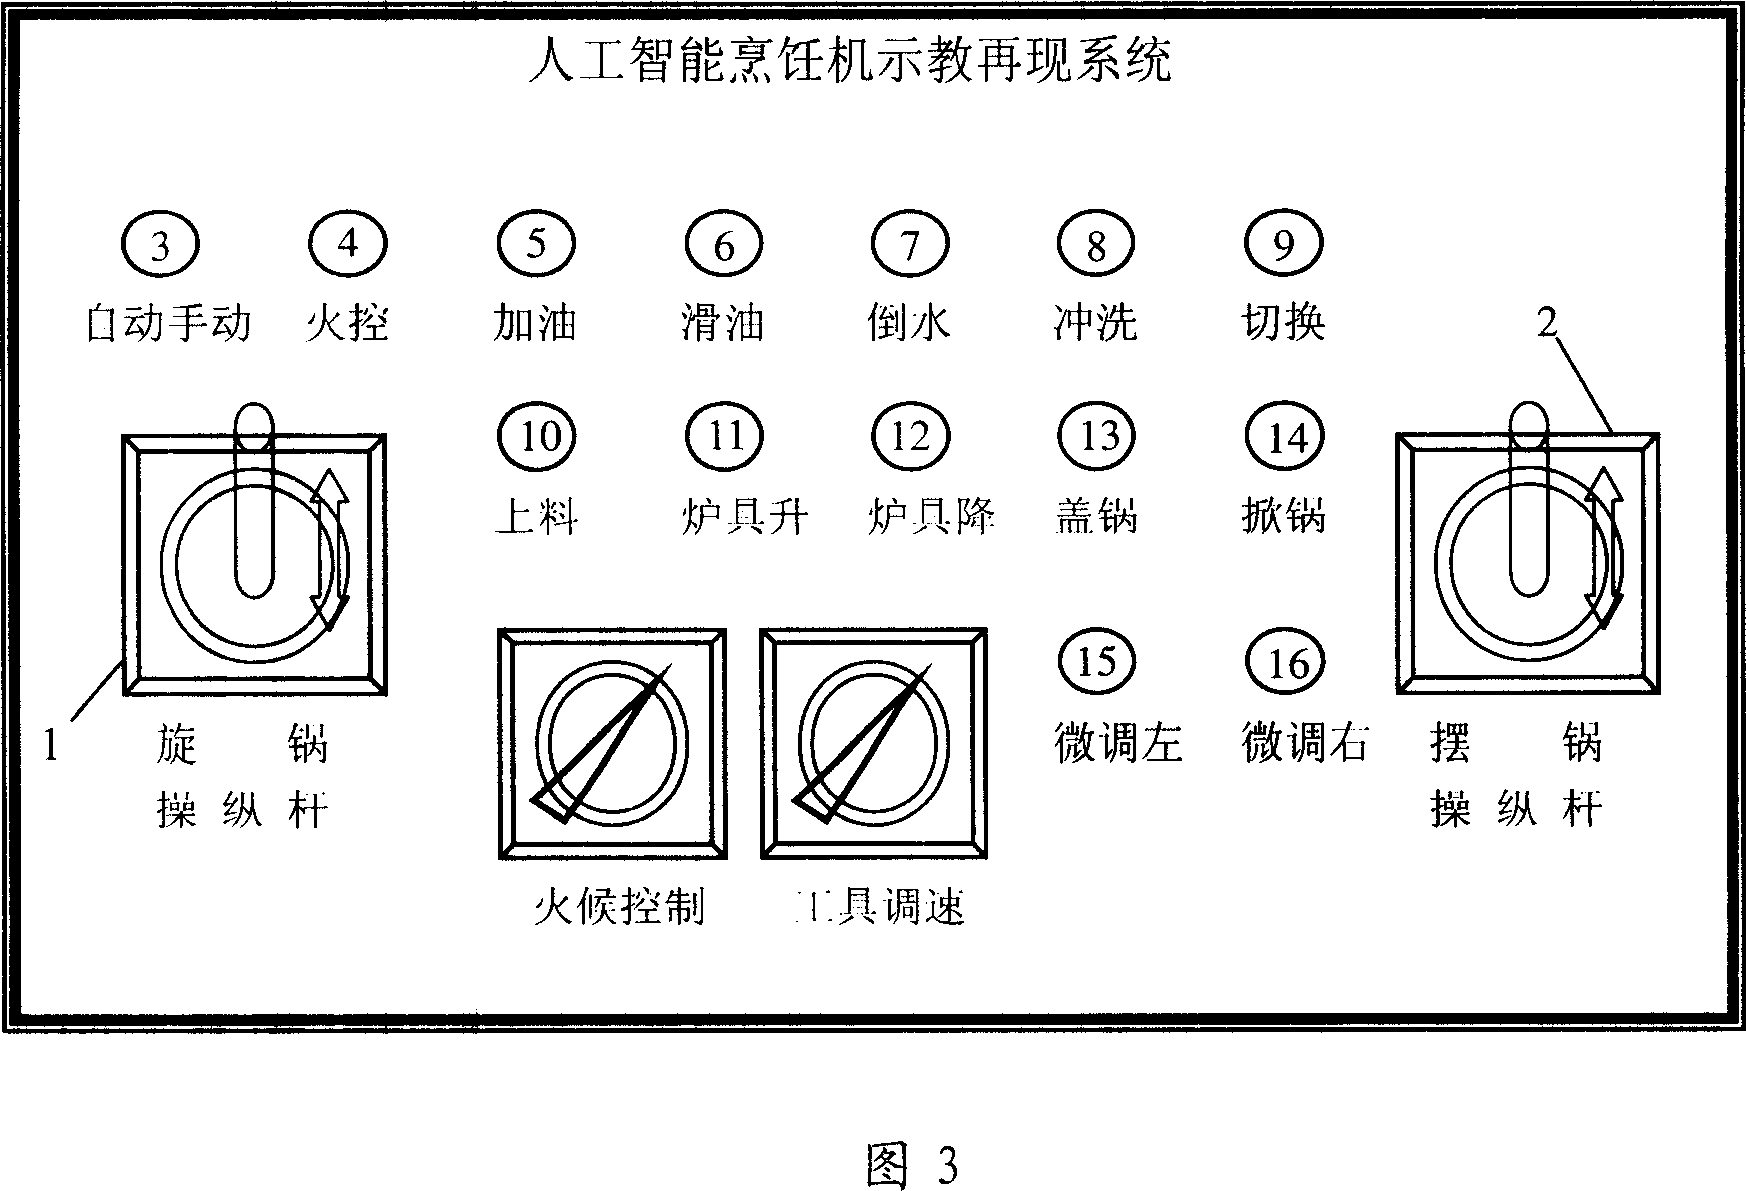 Teaching-playback system for automatic/semi-automatic cooking system